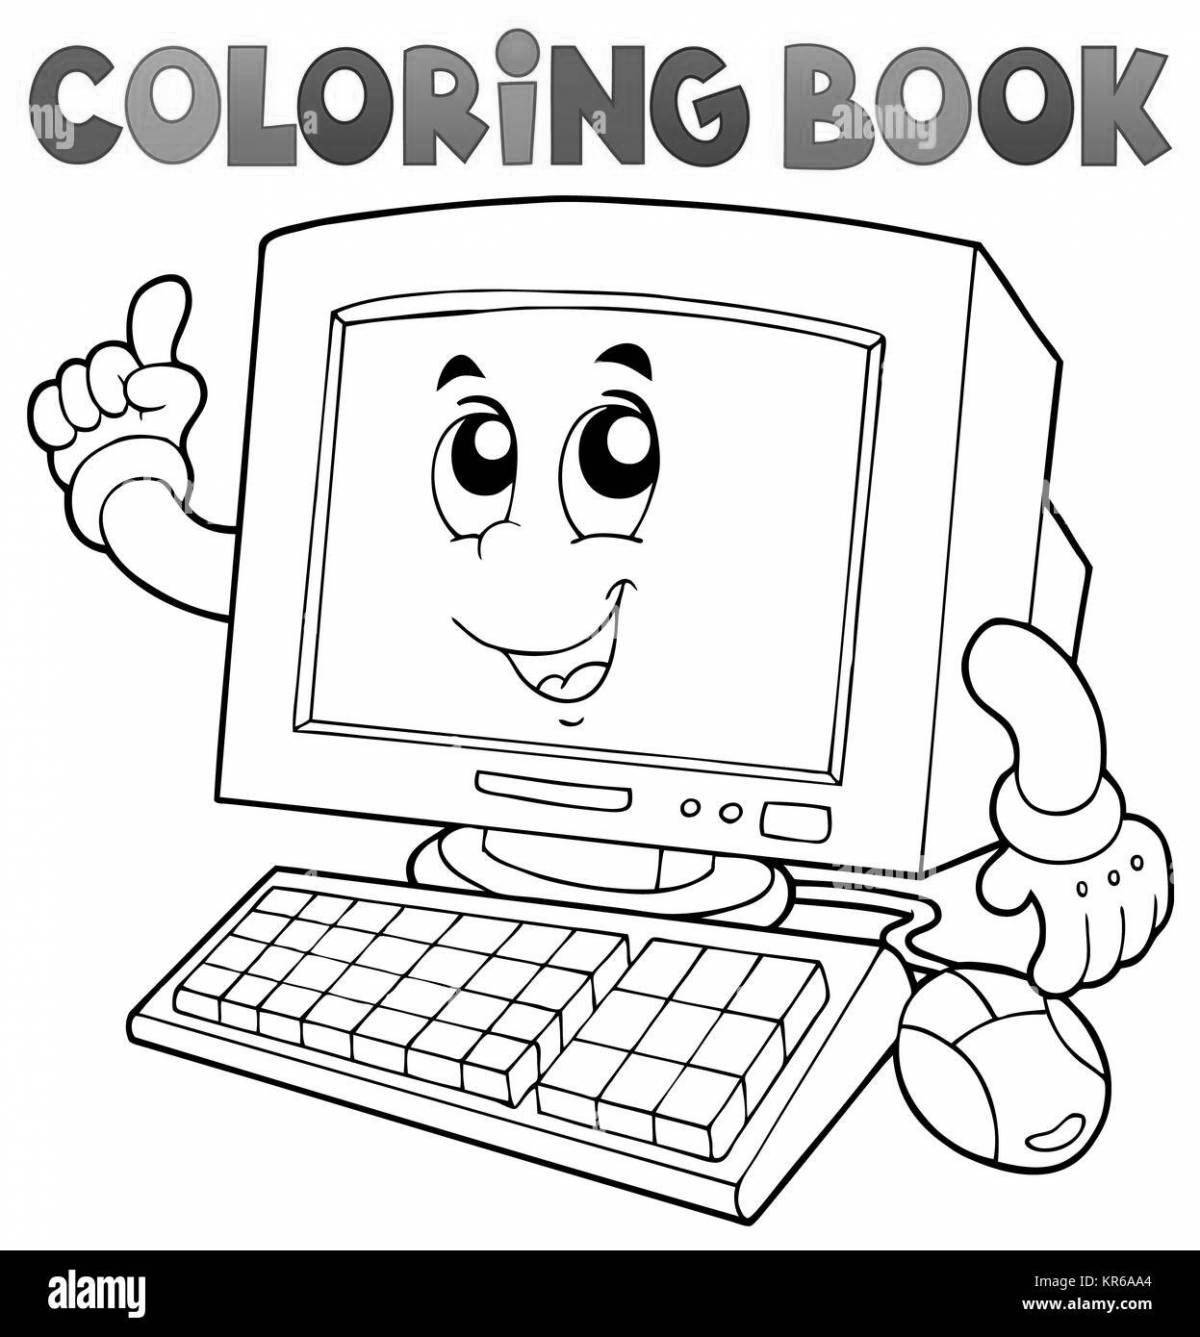 Adorable safe internet coloring page